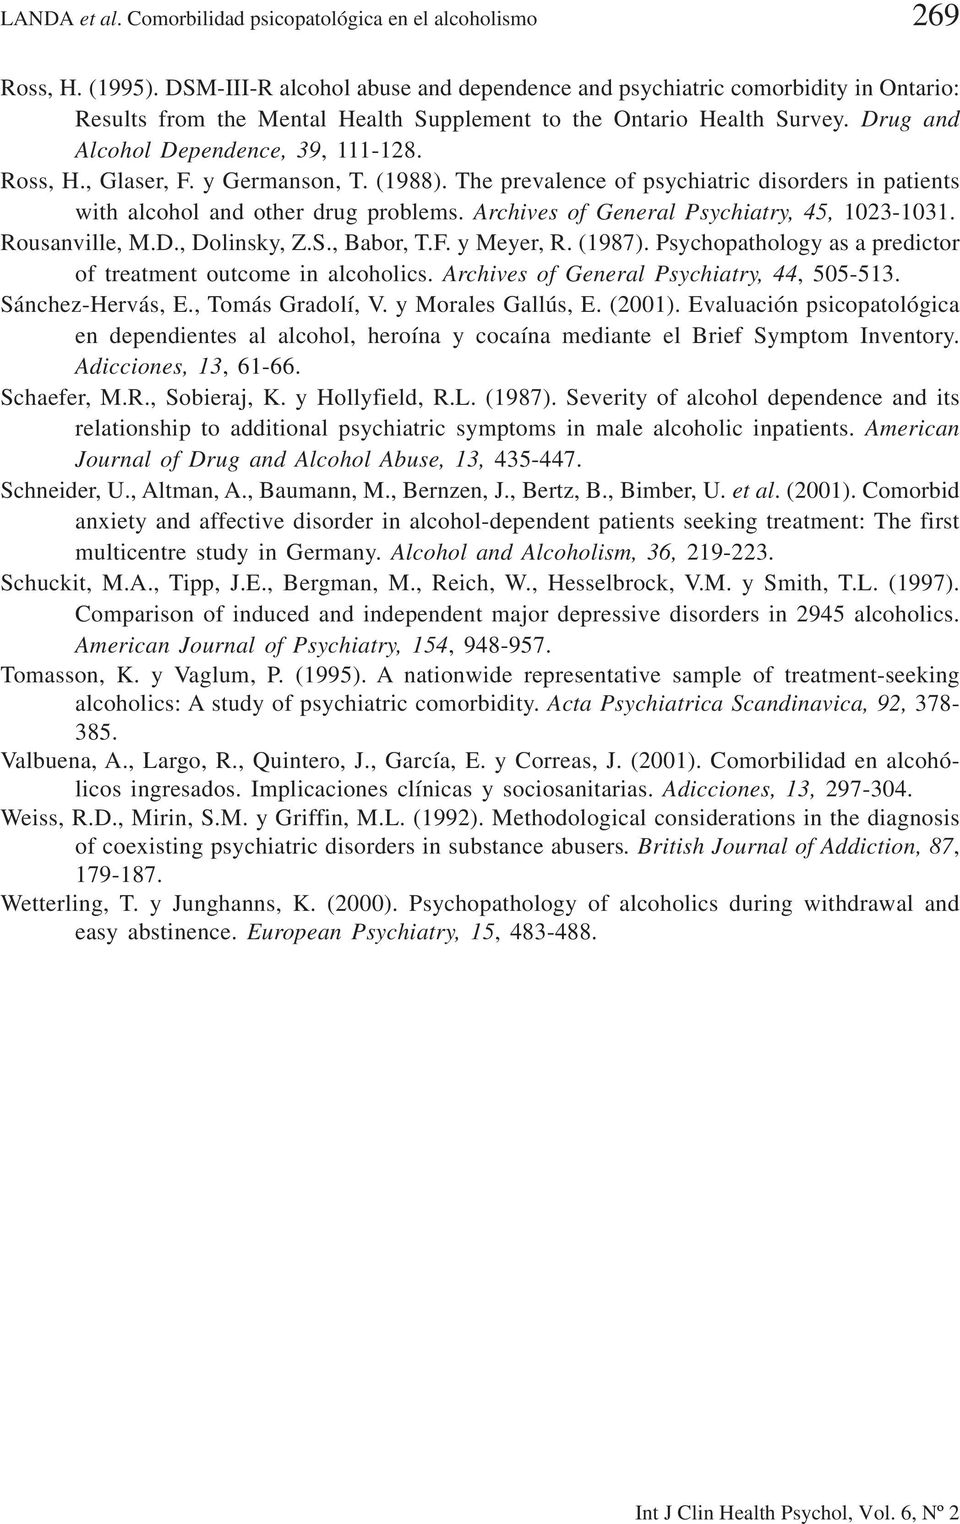 Ross, H., Glaser, F. y Germanson, T. (1988). The prevalence of psychiatric disorders in patients with alcohol and other drug problems. Archives of General Psychiatry, 45, 1023-1031. Rousanville, M.D.